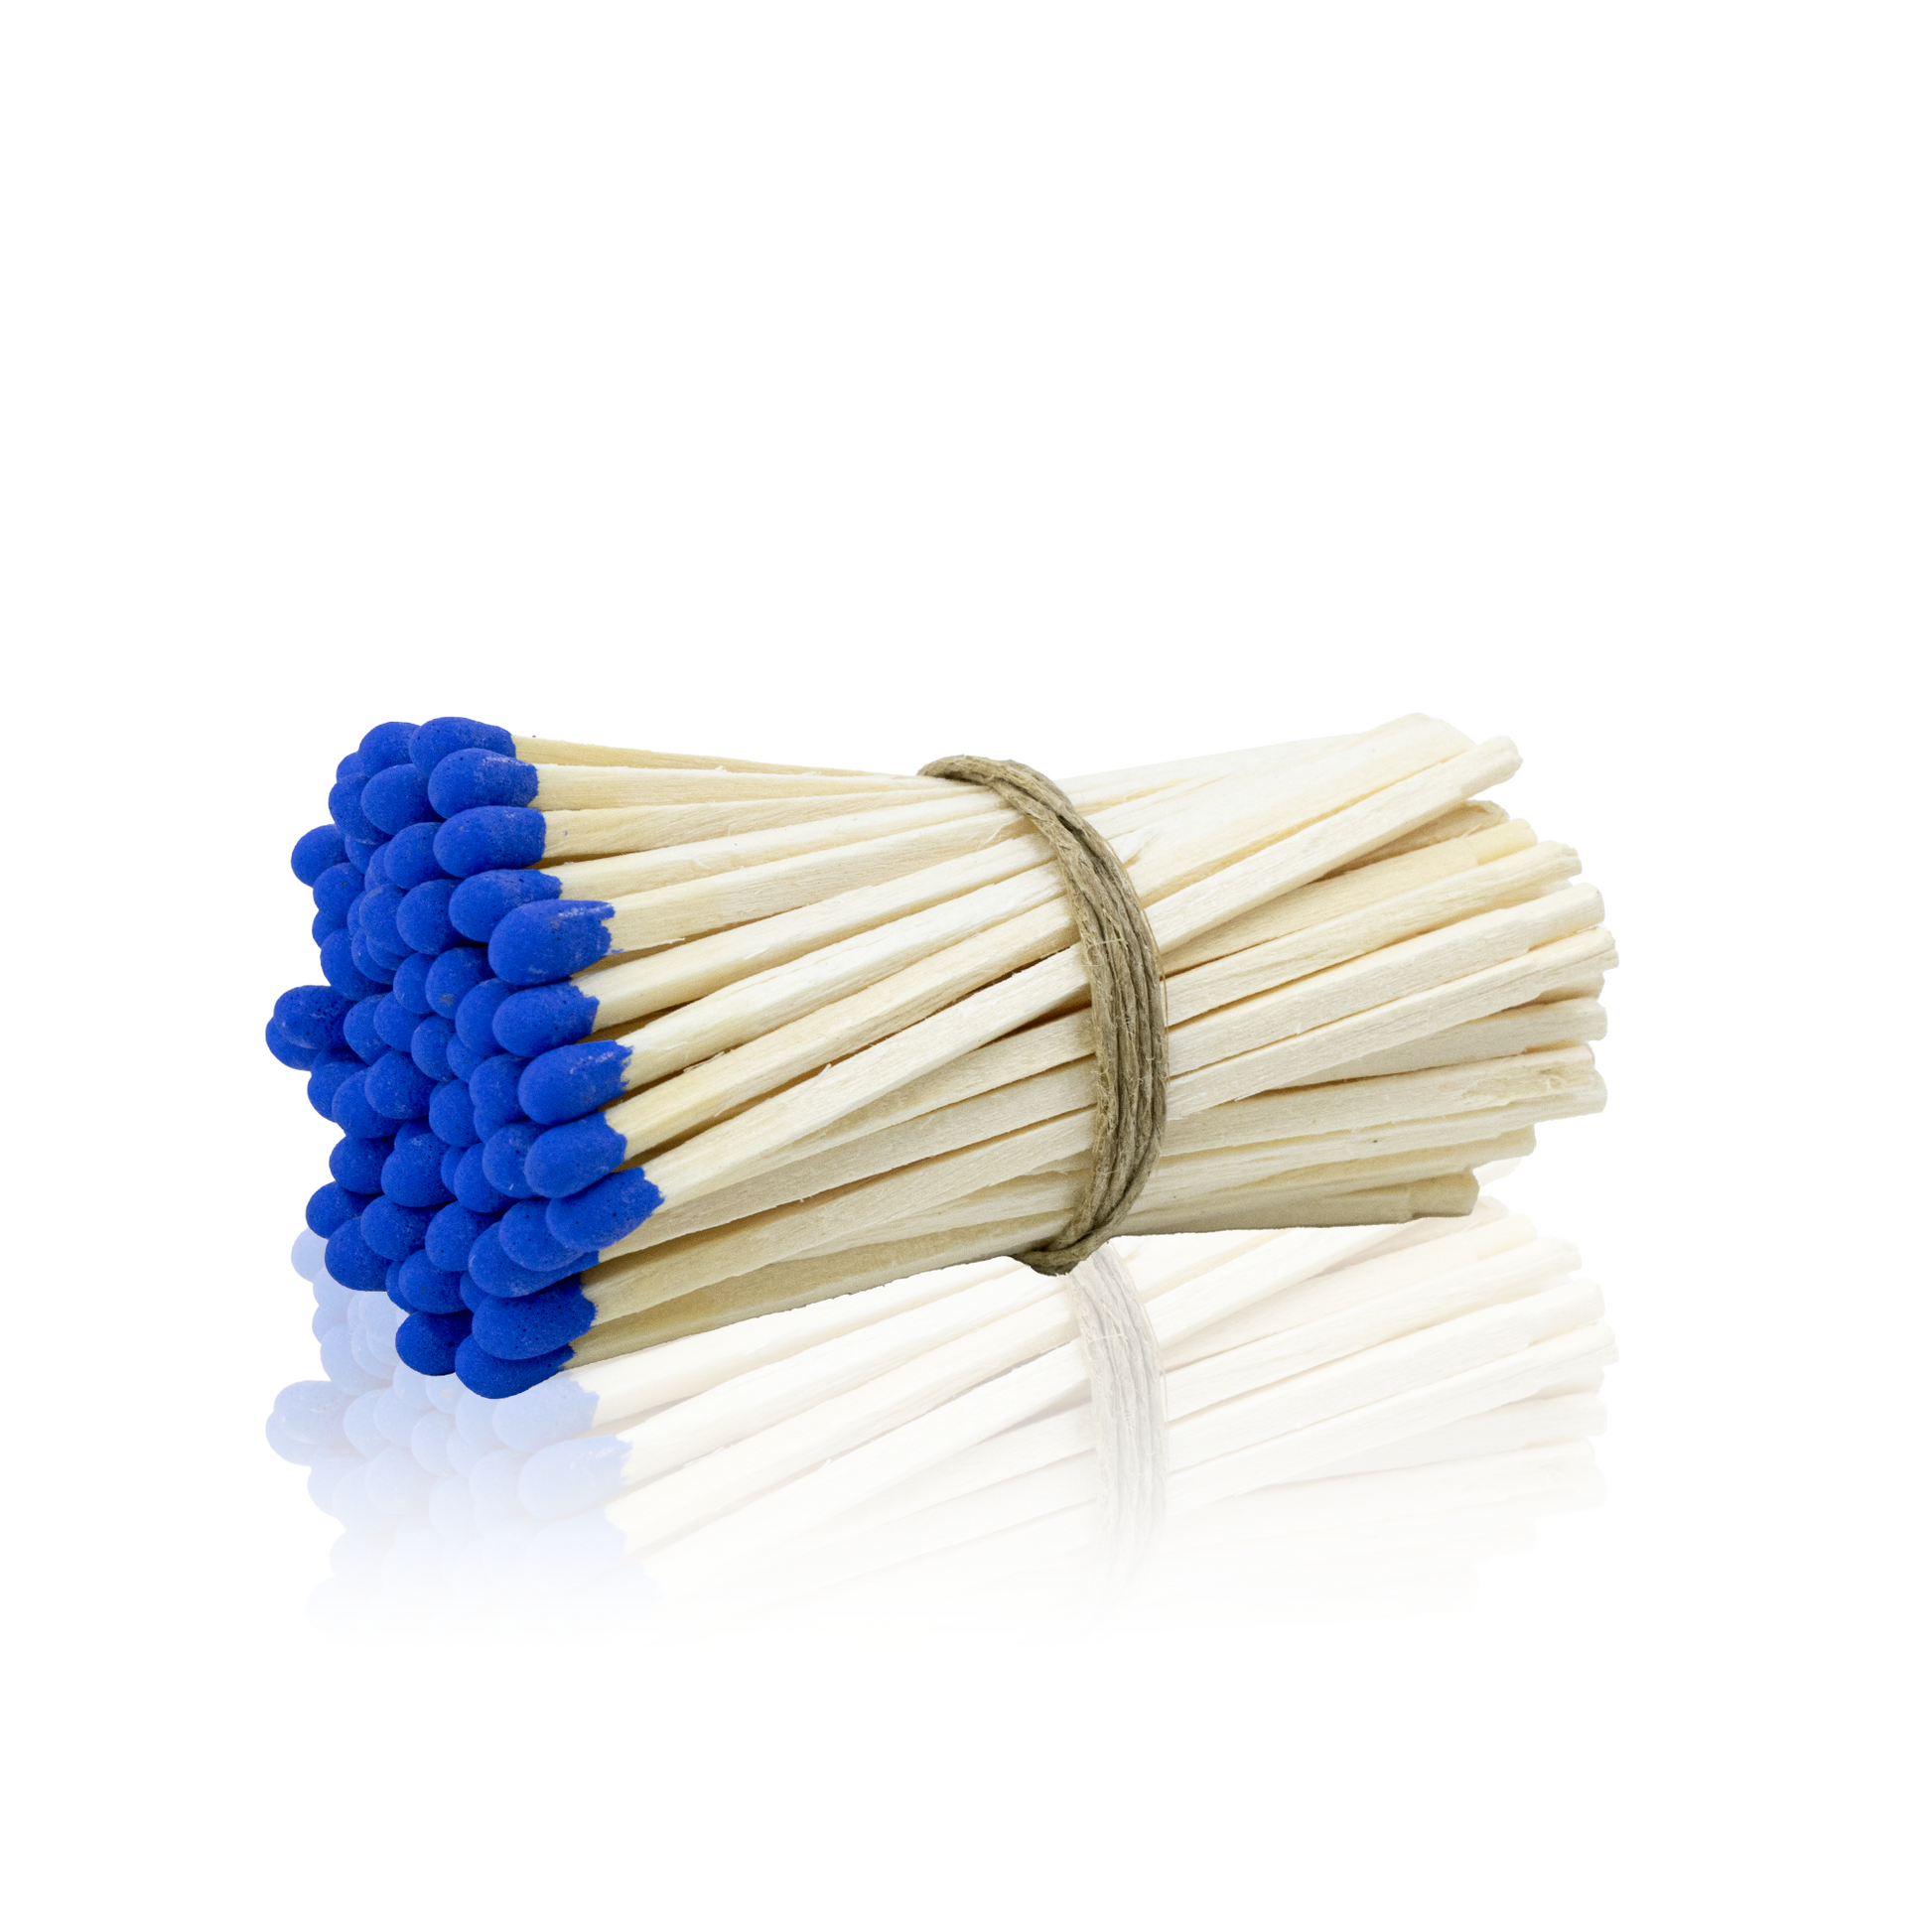 3.75 Blue Color Matches (100 Count) - Plus Free Striker!!! - Long  Decorative Wooden Match Sticks - Wholesale Bulk for Candles and Fireplace  (Blue)